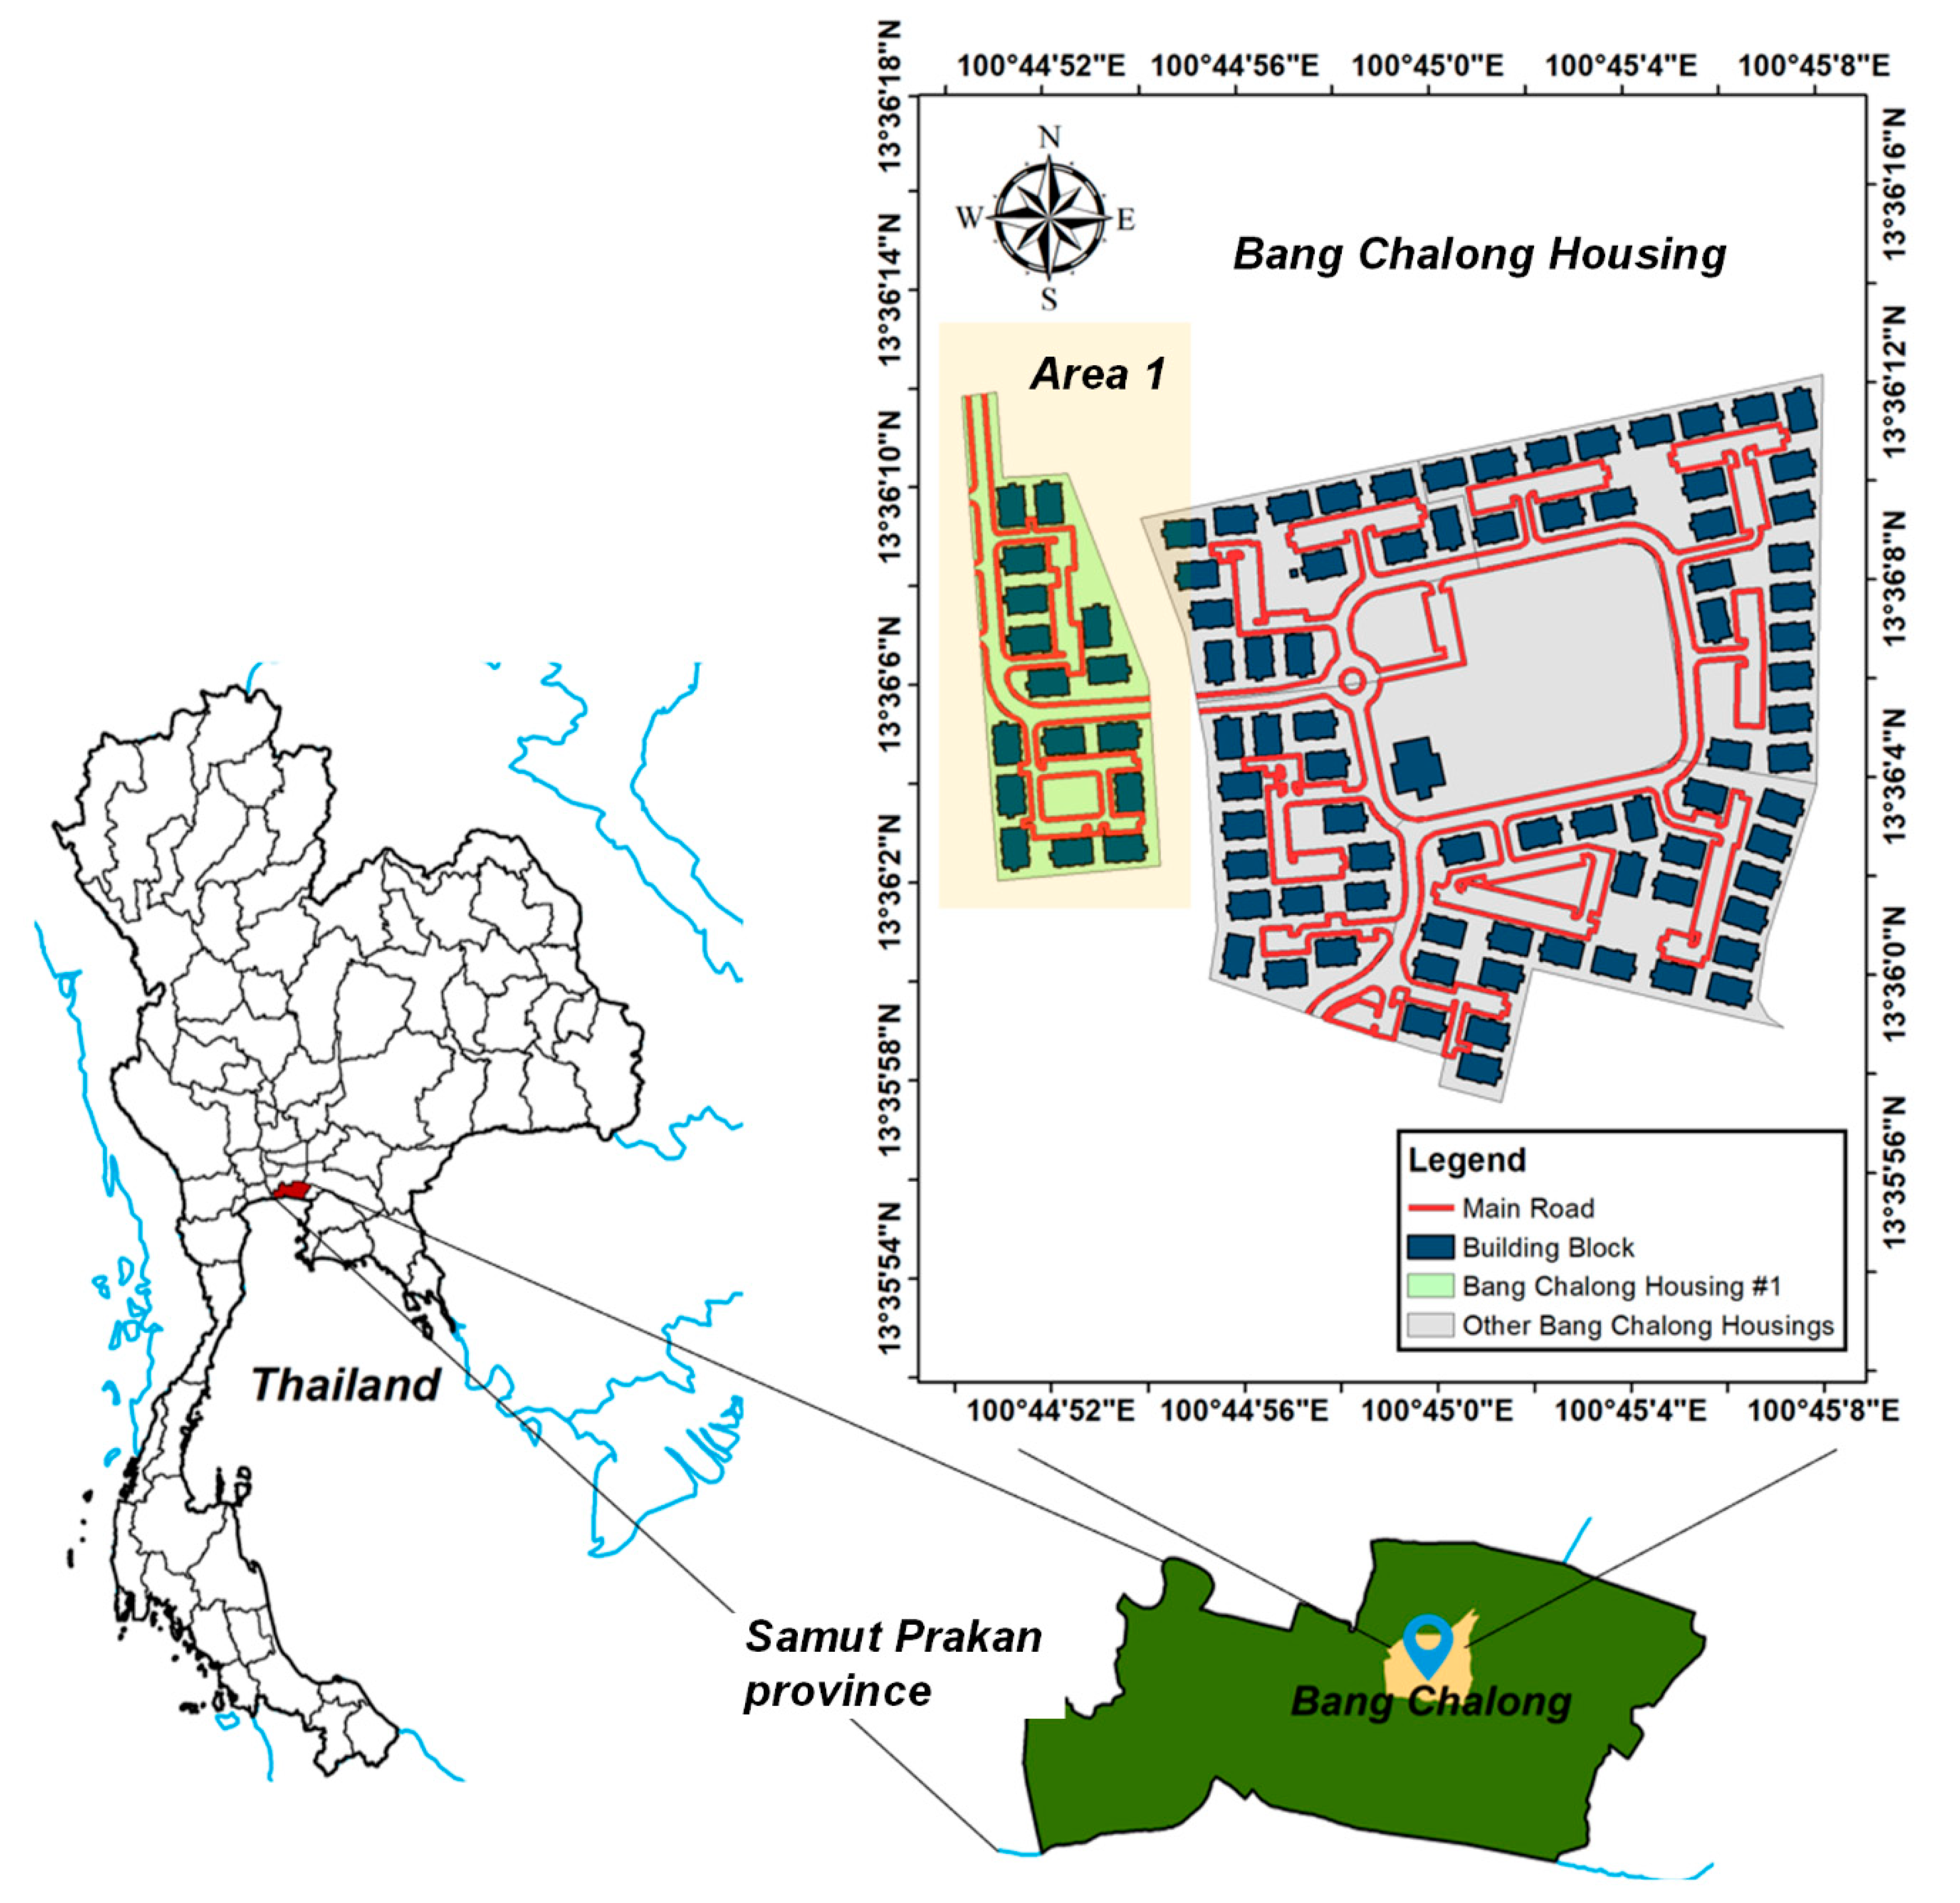 Sustainability | Free Full-Text | Studying Waste Separation Behaviors and  Environmental Impacts toward Sustainable Solid Waste Management: A Case  Study of Bang Chalong Housing, Samut Prakan, Thailand | HTML